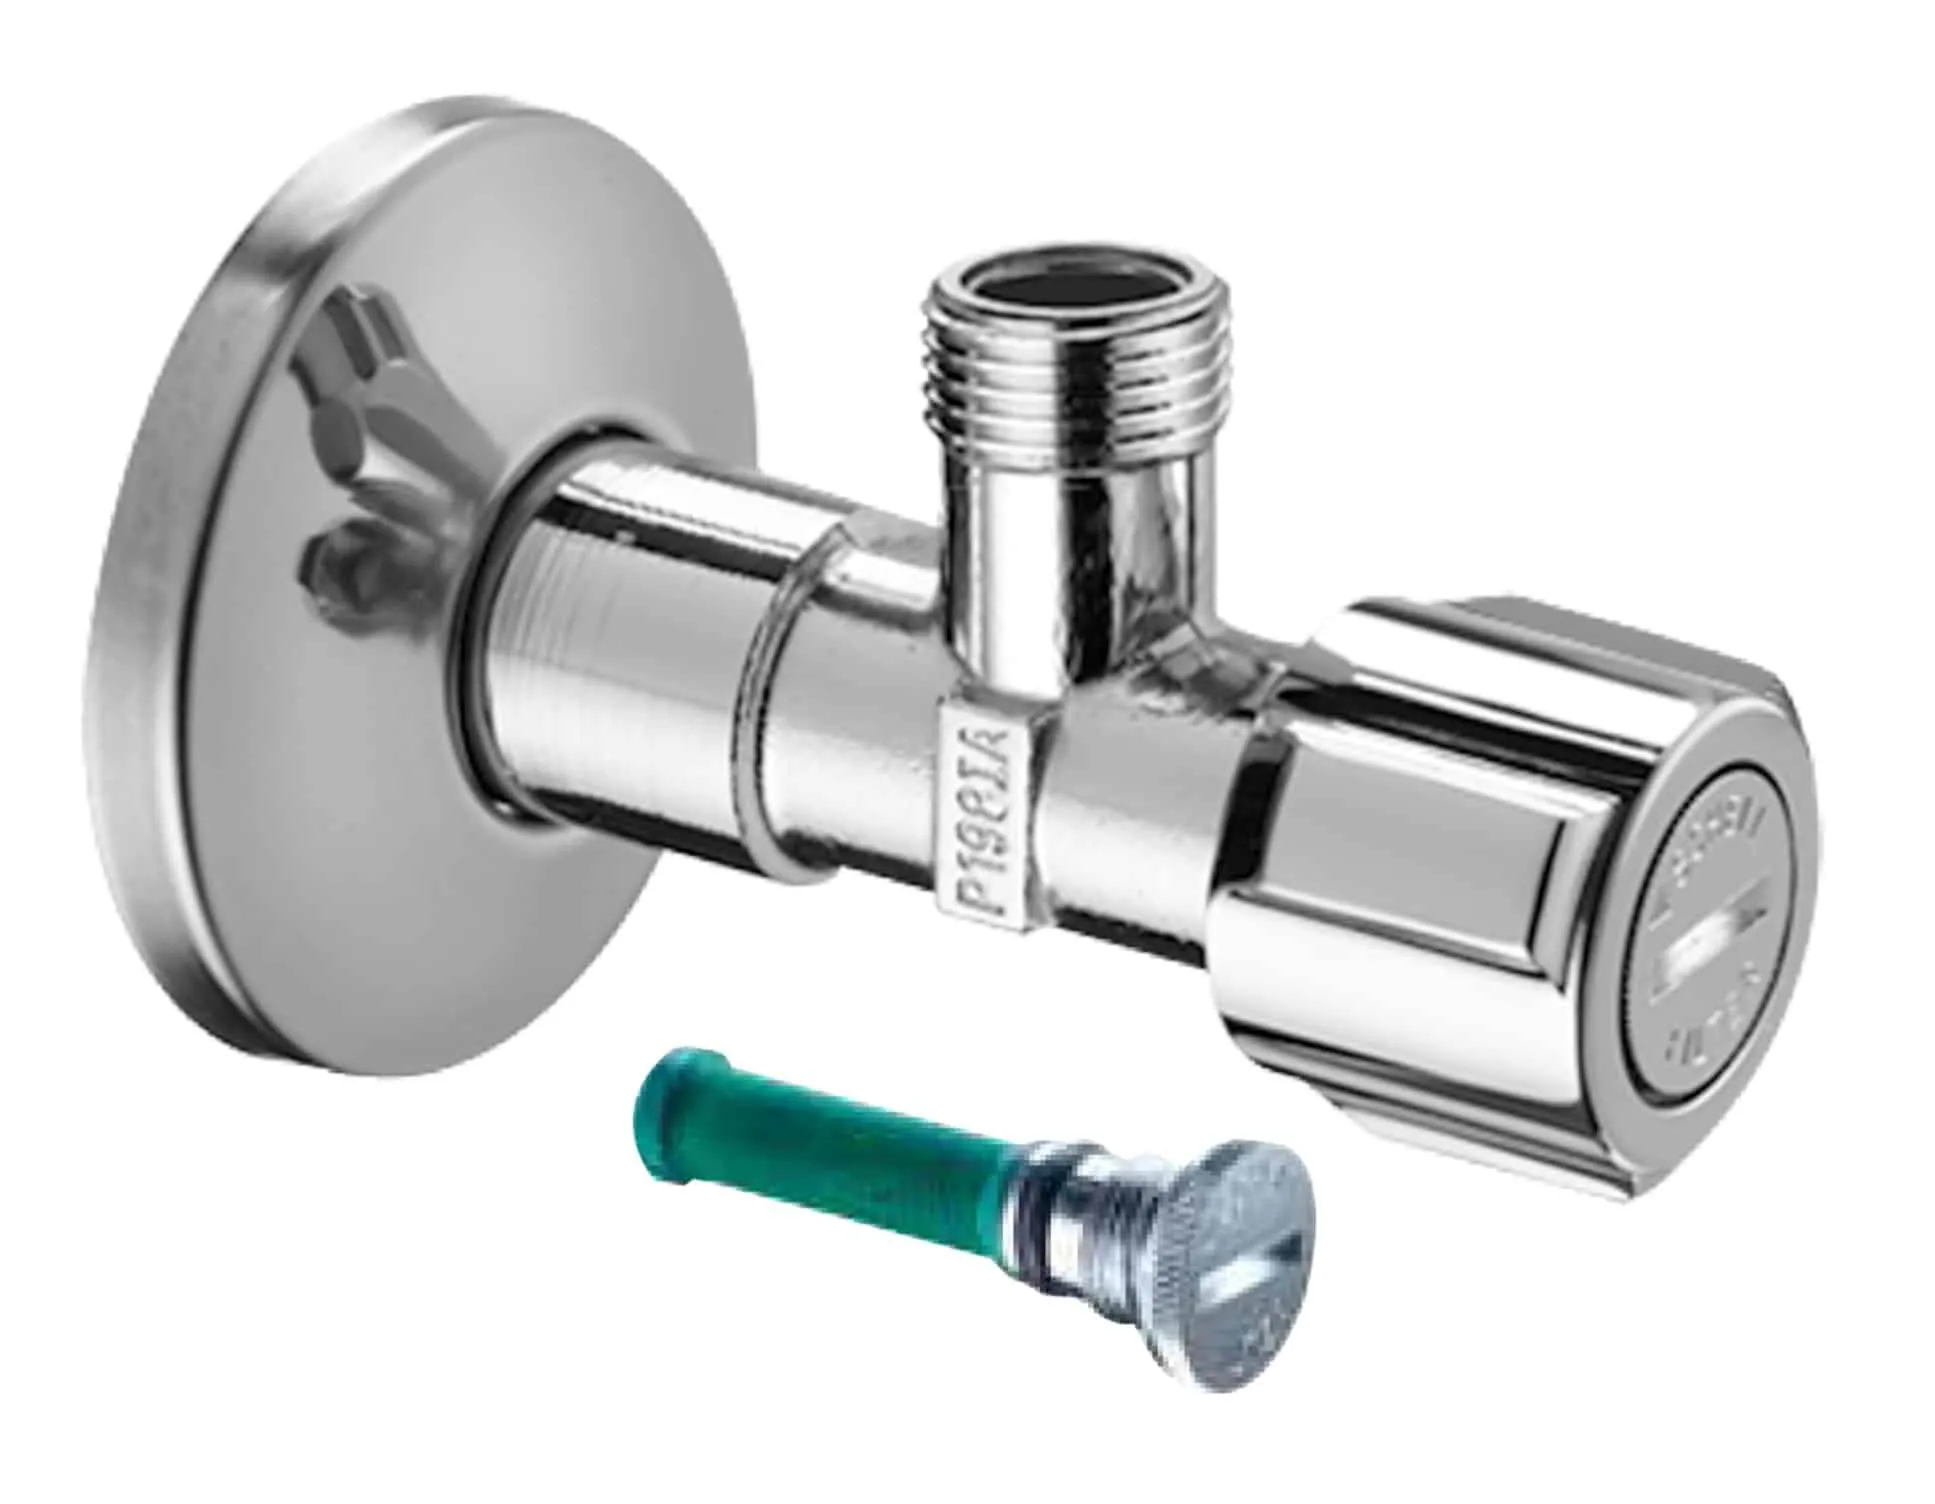 SCHELL filter angle valve depiction in silver for efficient plumbing system